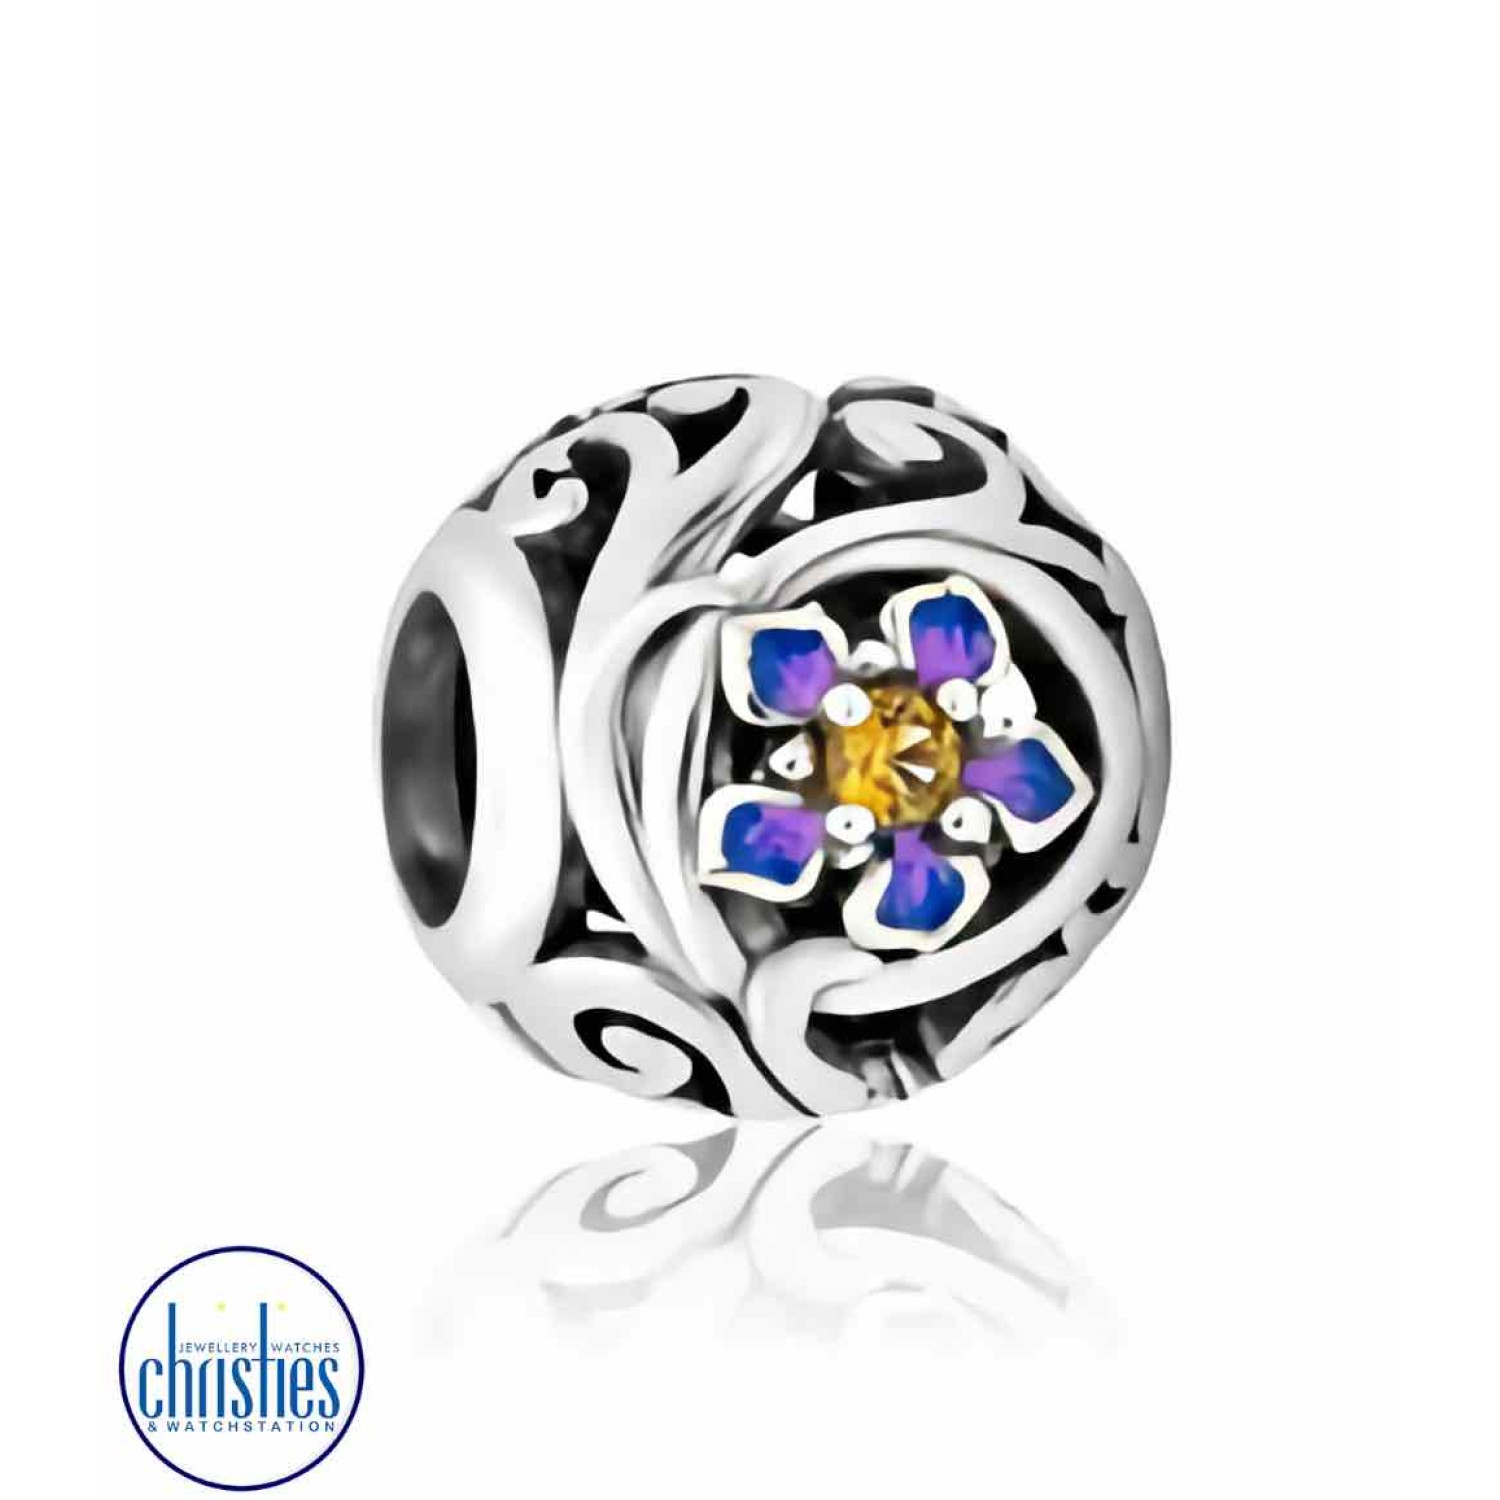 LKE080 Evolve Jewellery Chatham Island Forget Me Not Charm. This resilient wee wildflower is a New Zealand favourite and is often found growing on sand dunes and cliff edges.These stunning flowers play their part in keeping New Zealand’s gardens alive and